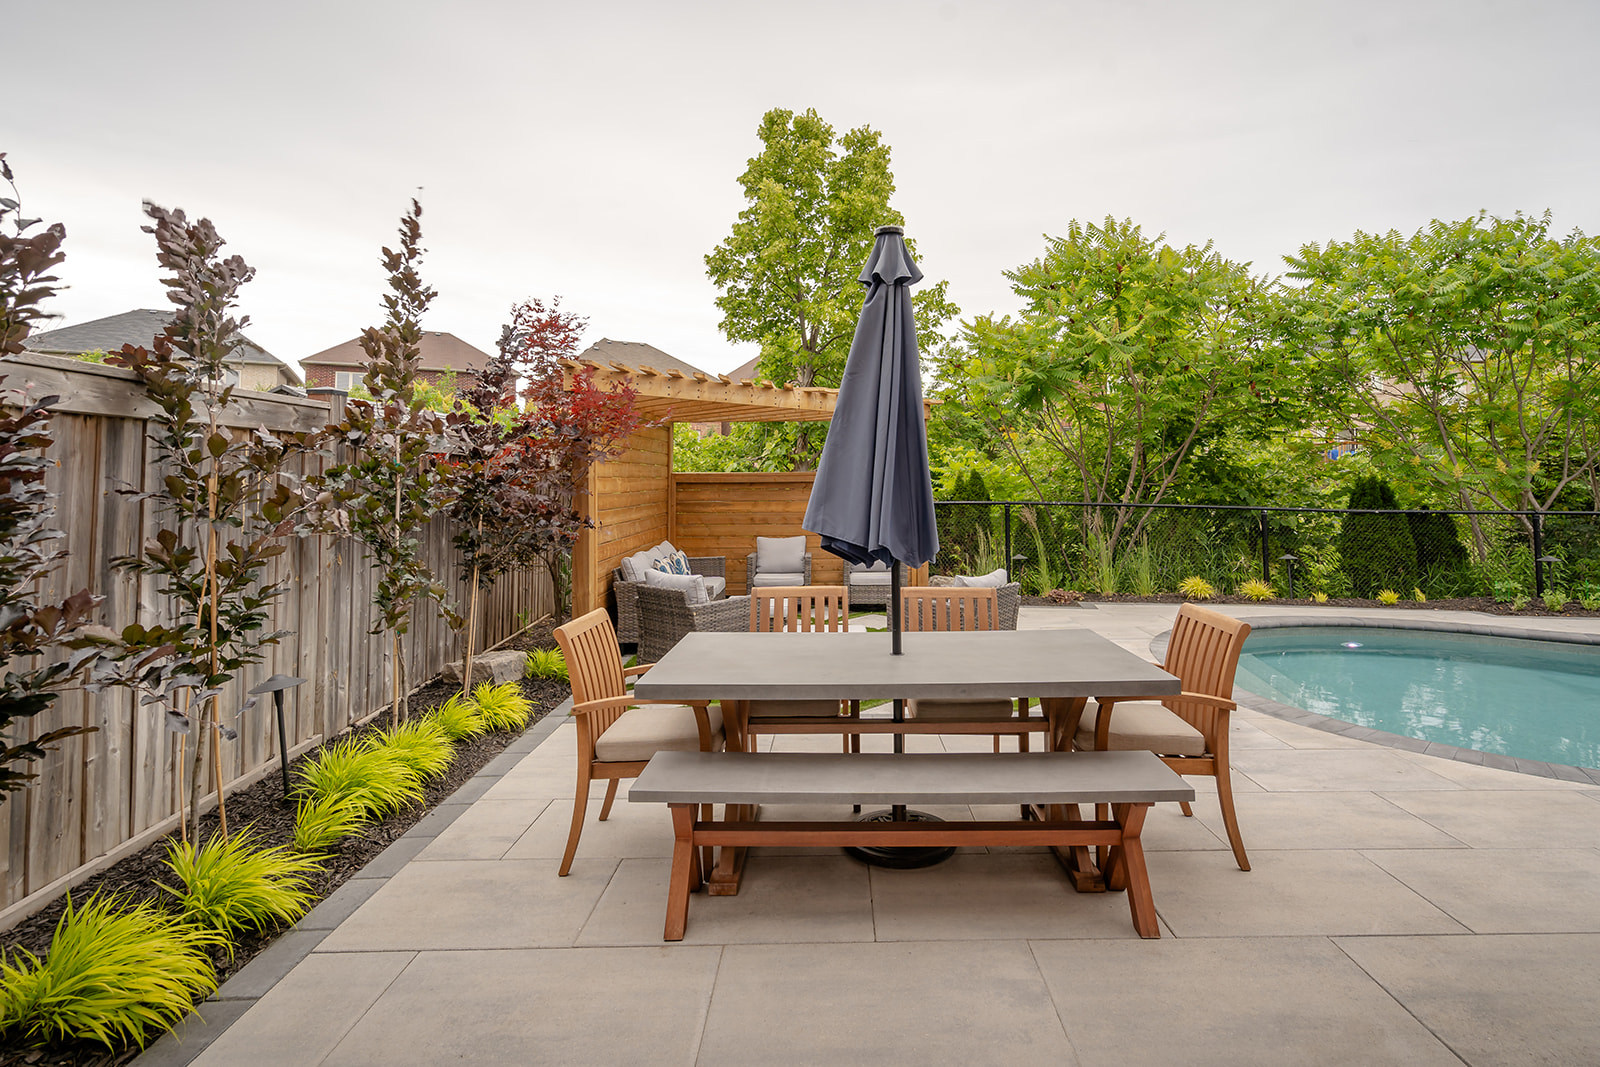 An outdoor table with an inground pool off to the side.